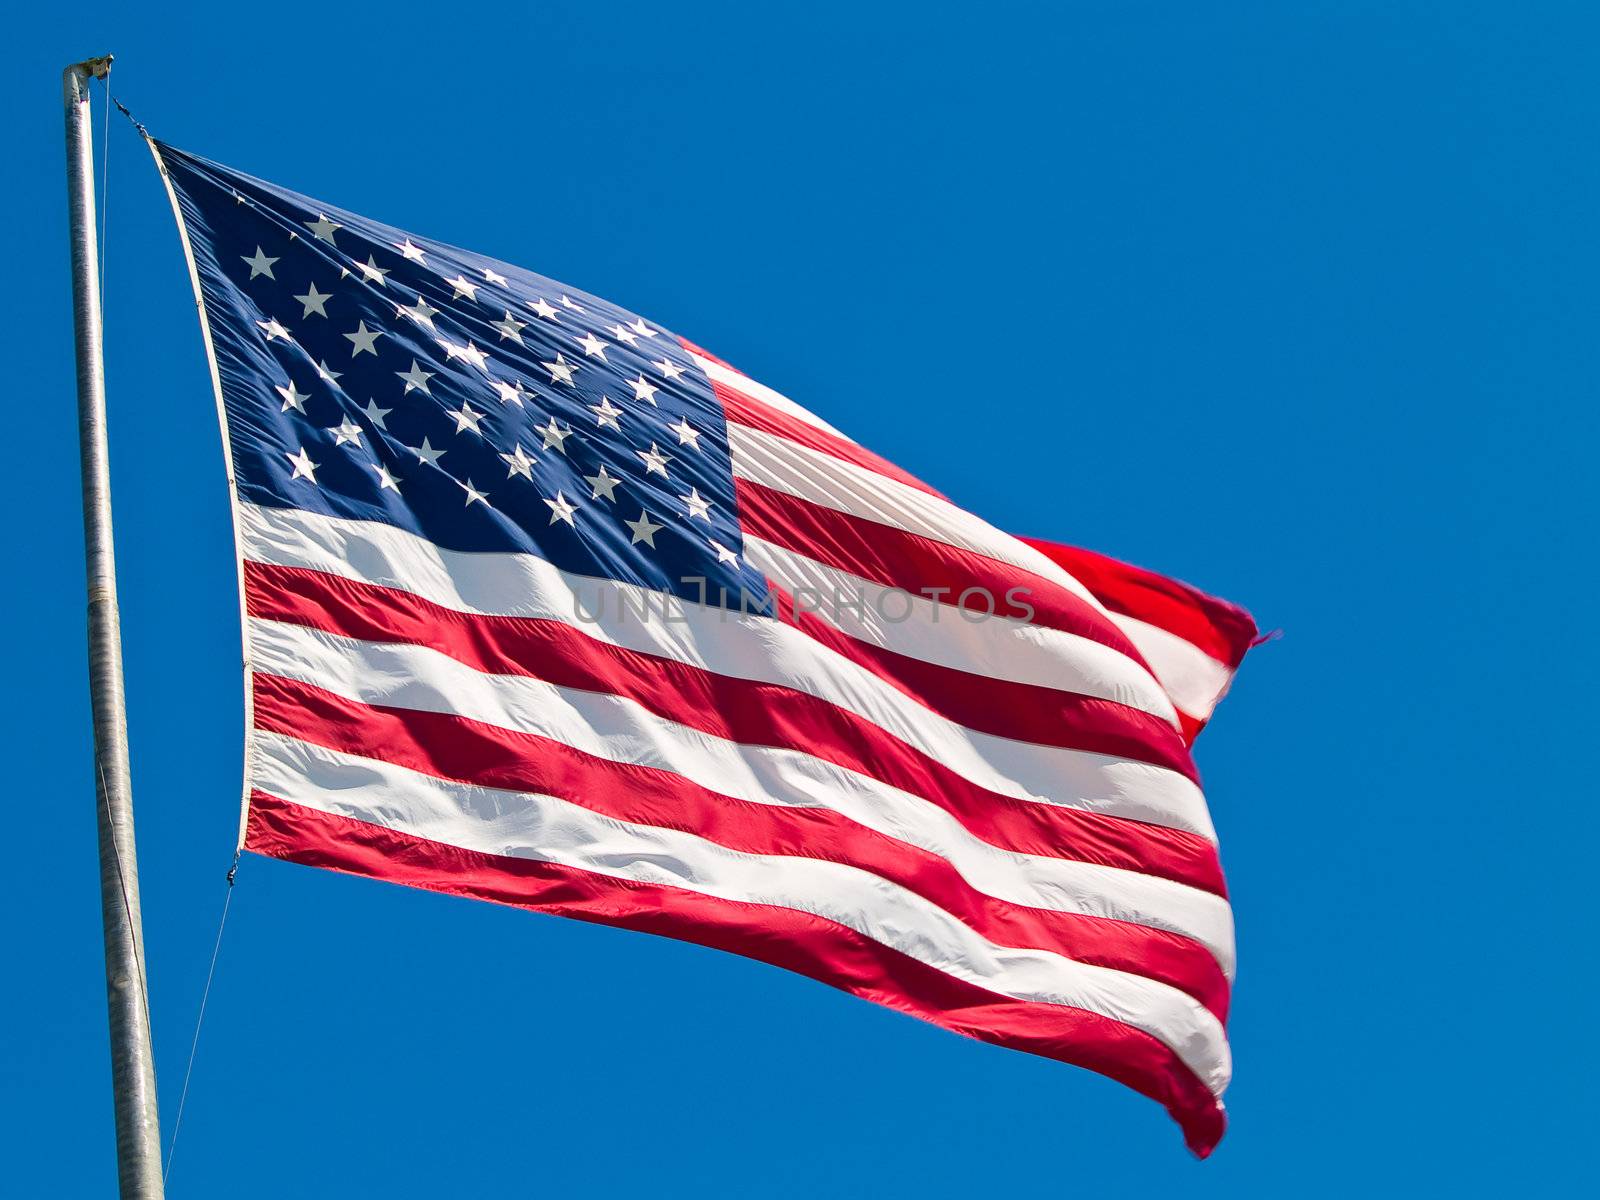 American Flag Waving Proudly on a Clear Windy Day by Frankljunior